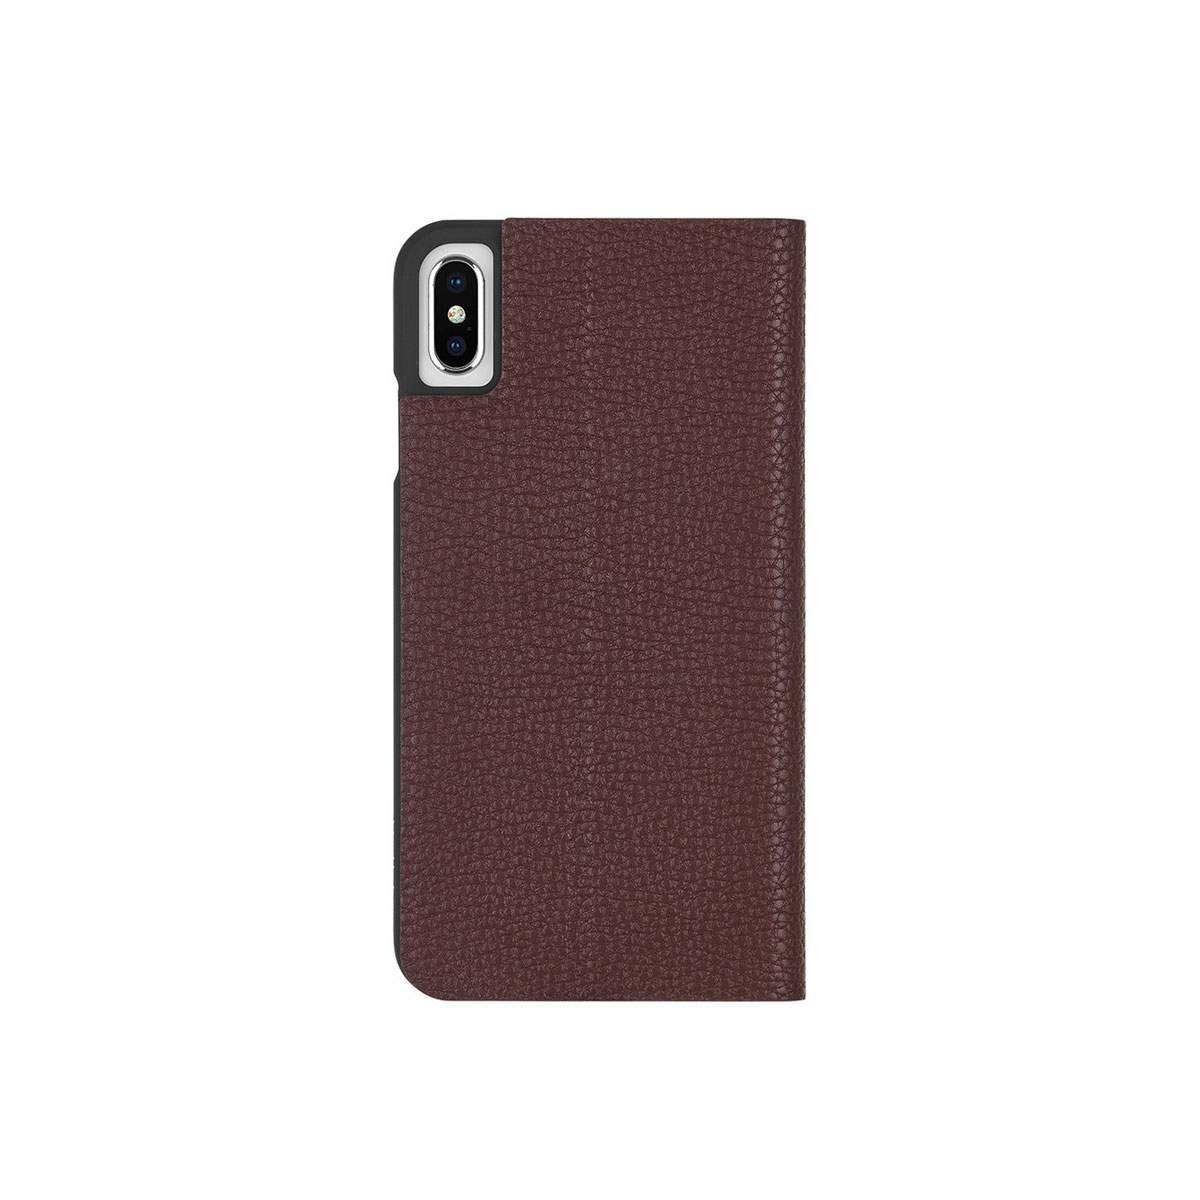 Case-Mate iPhone X/Xs Barely There Folio - Brown